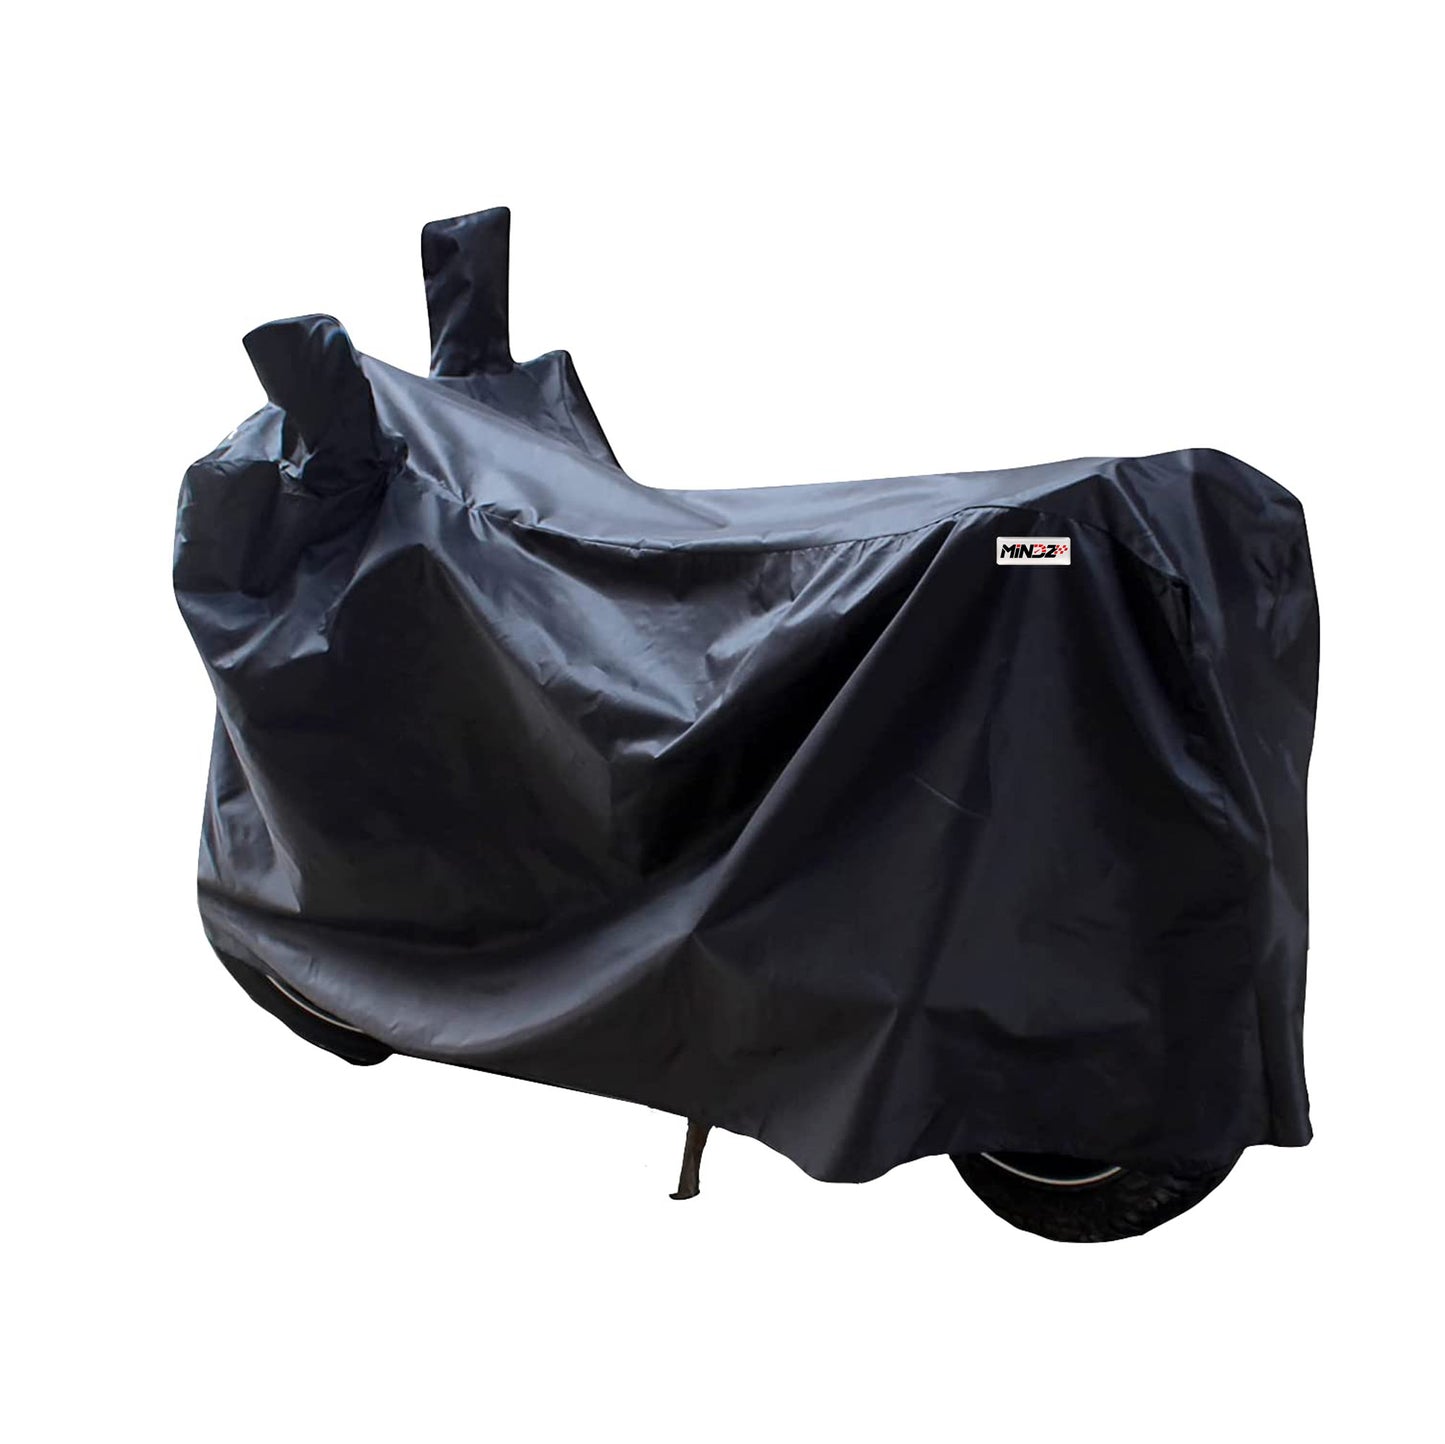 BODY COVER FOR FASCINO 125 BS6